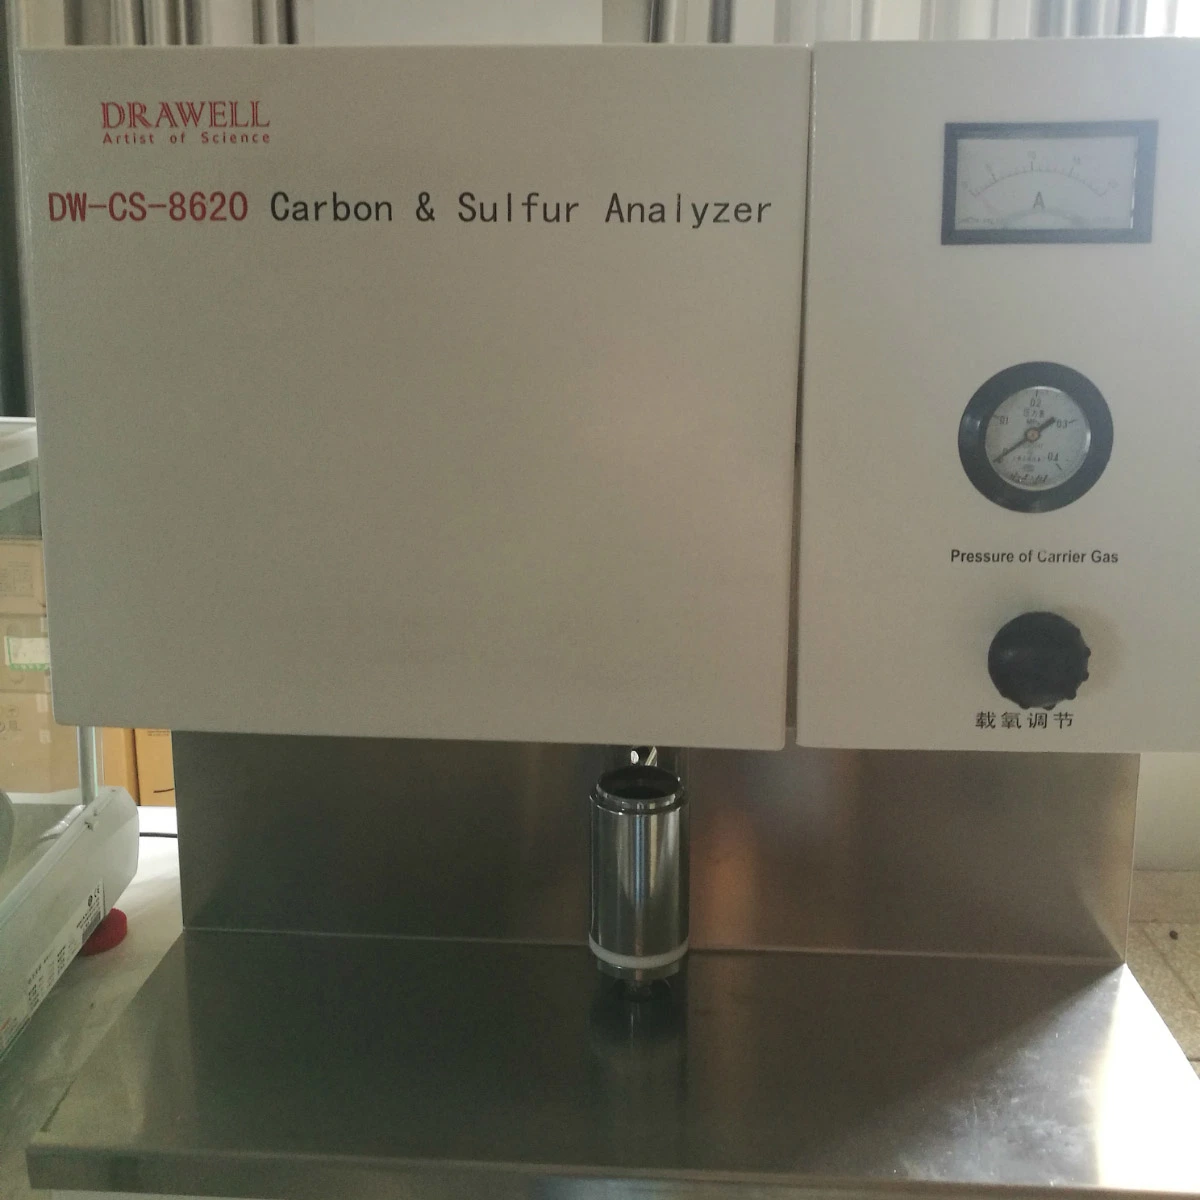 Drawell High quality/High cost performance Infrared Carbon Sulfur Analyzer Spectrophotometer